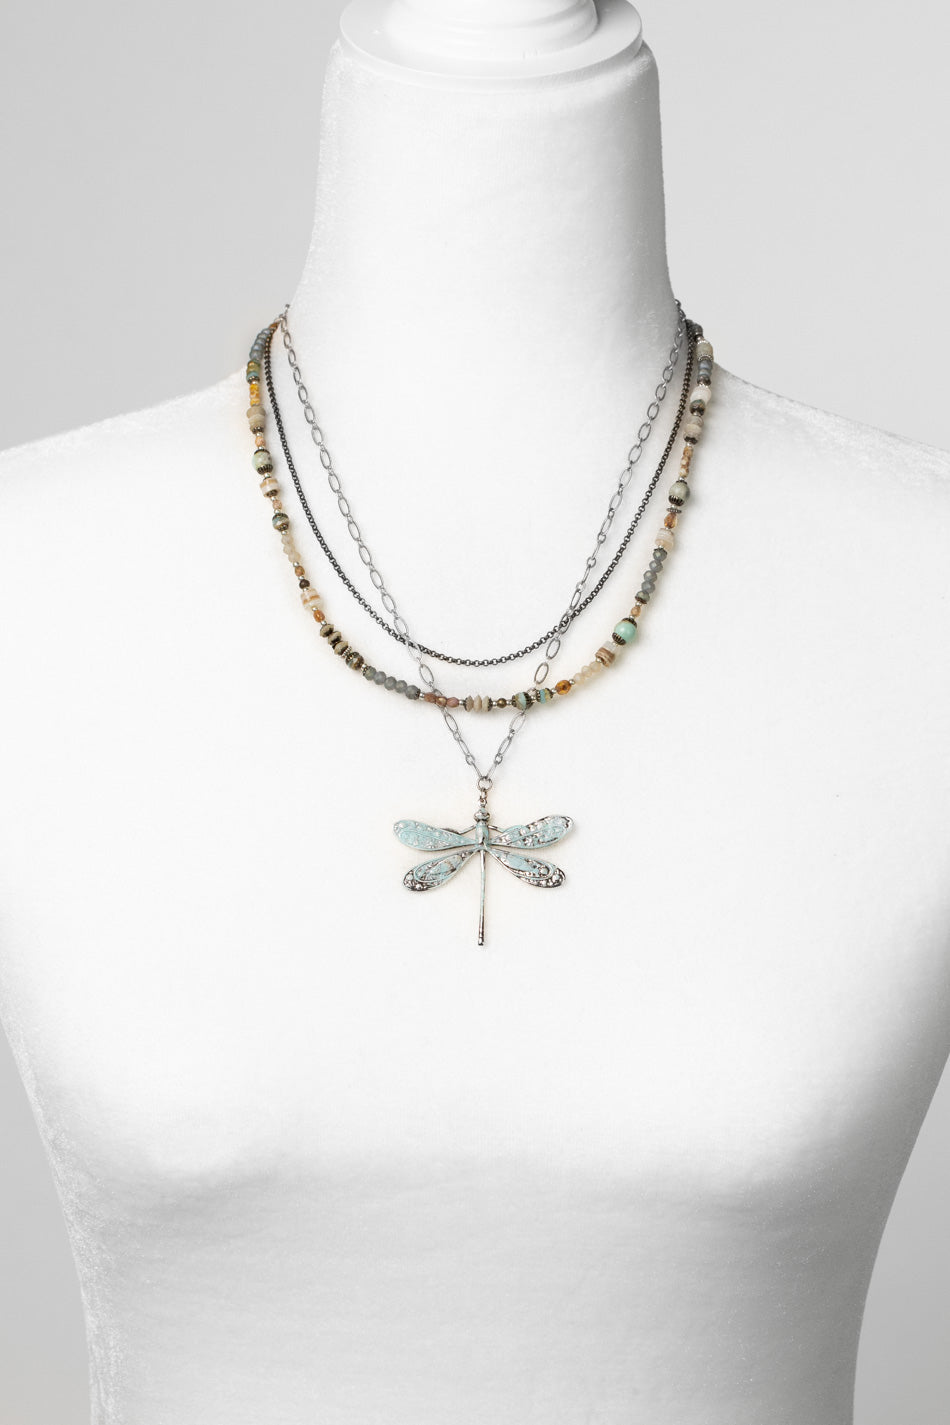 Wisdom Within 16.5-18.5" Czech Glass, Caribbean Calcite Shell With Patina Dragonfly Pendant Multistrand Necklace